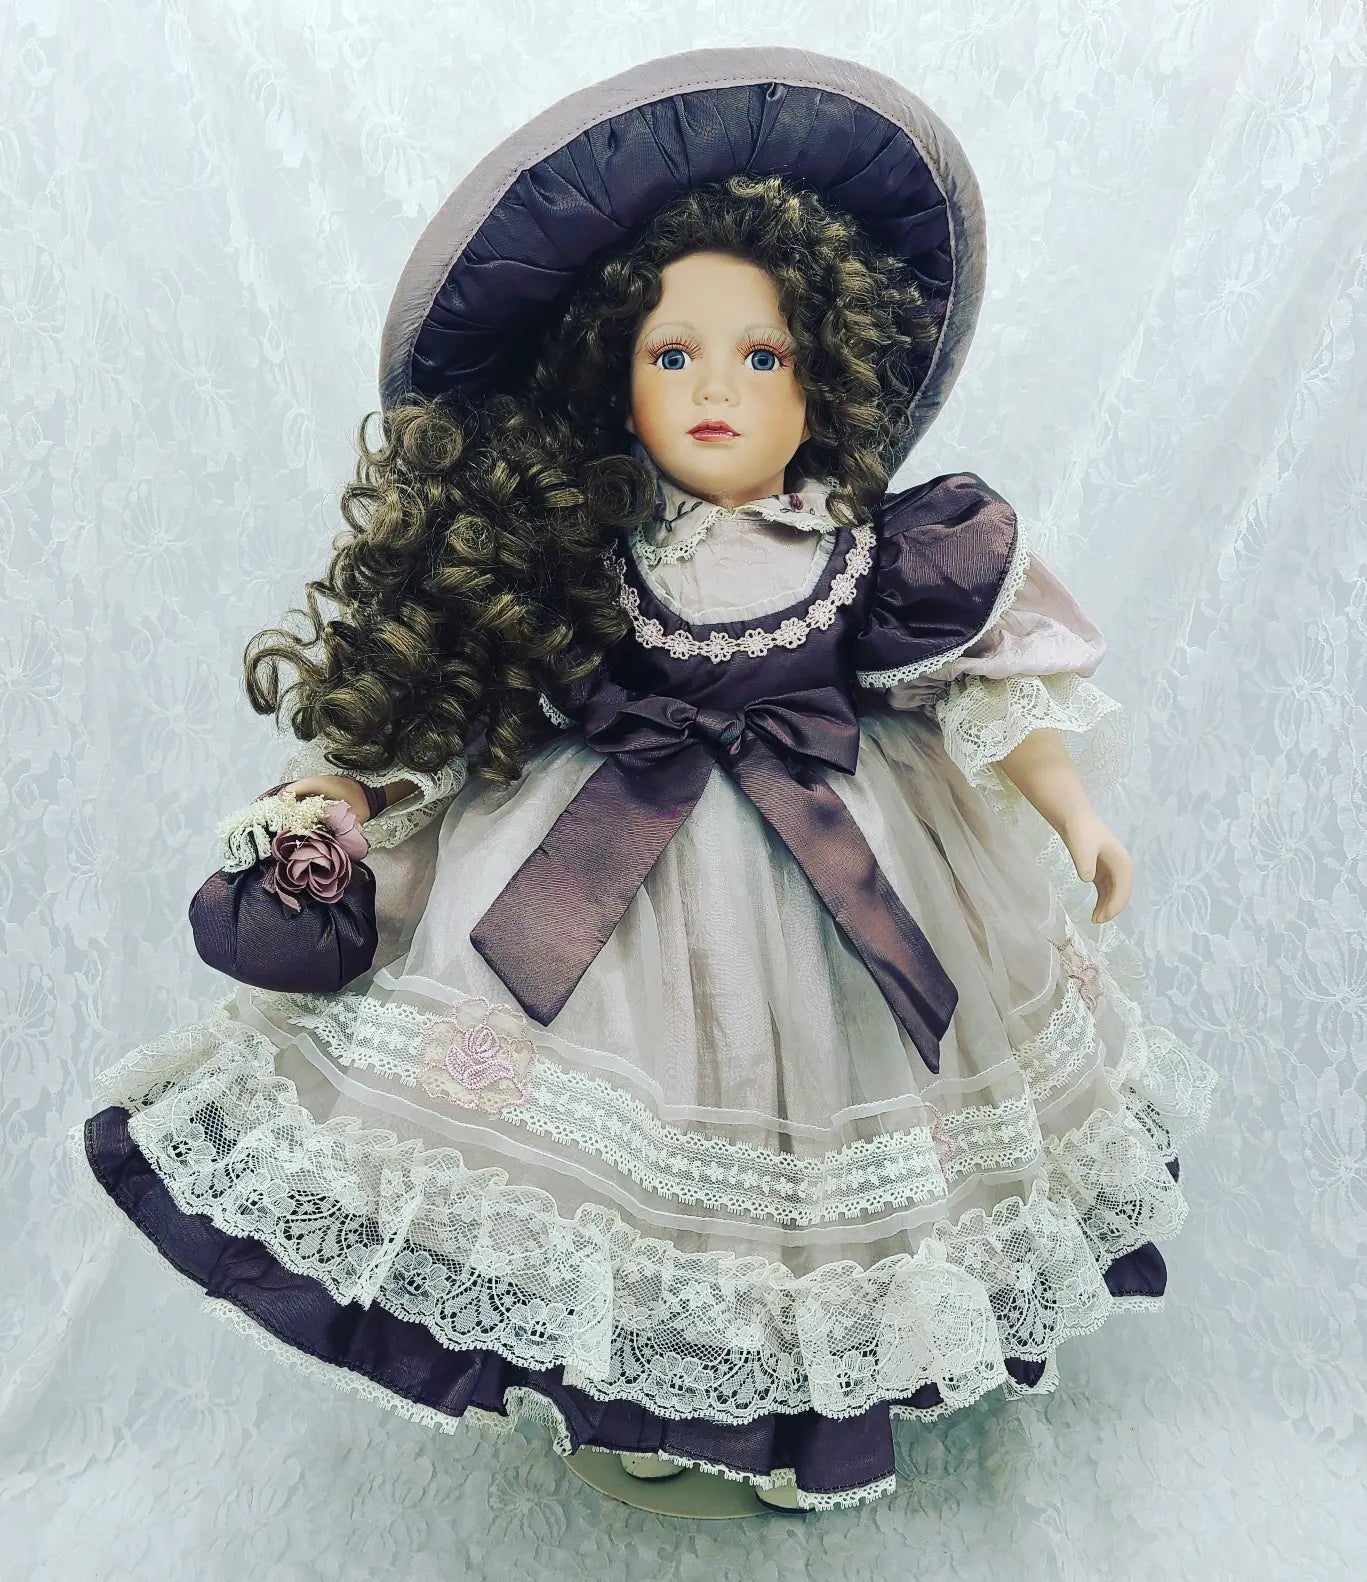 Reserved Danielle 9/8 Emmeline Haunted Doll ~ 24" BIG Fancy Heavy Porcelain Doll ~ Paranormal ~ Intuitive ~ Experience Preferred ~ Smart and Highly Communicative